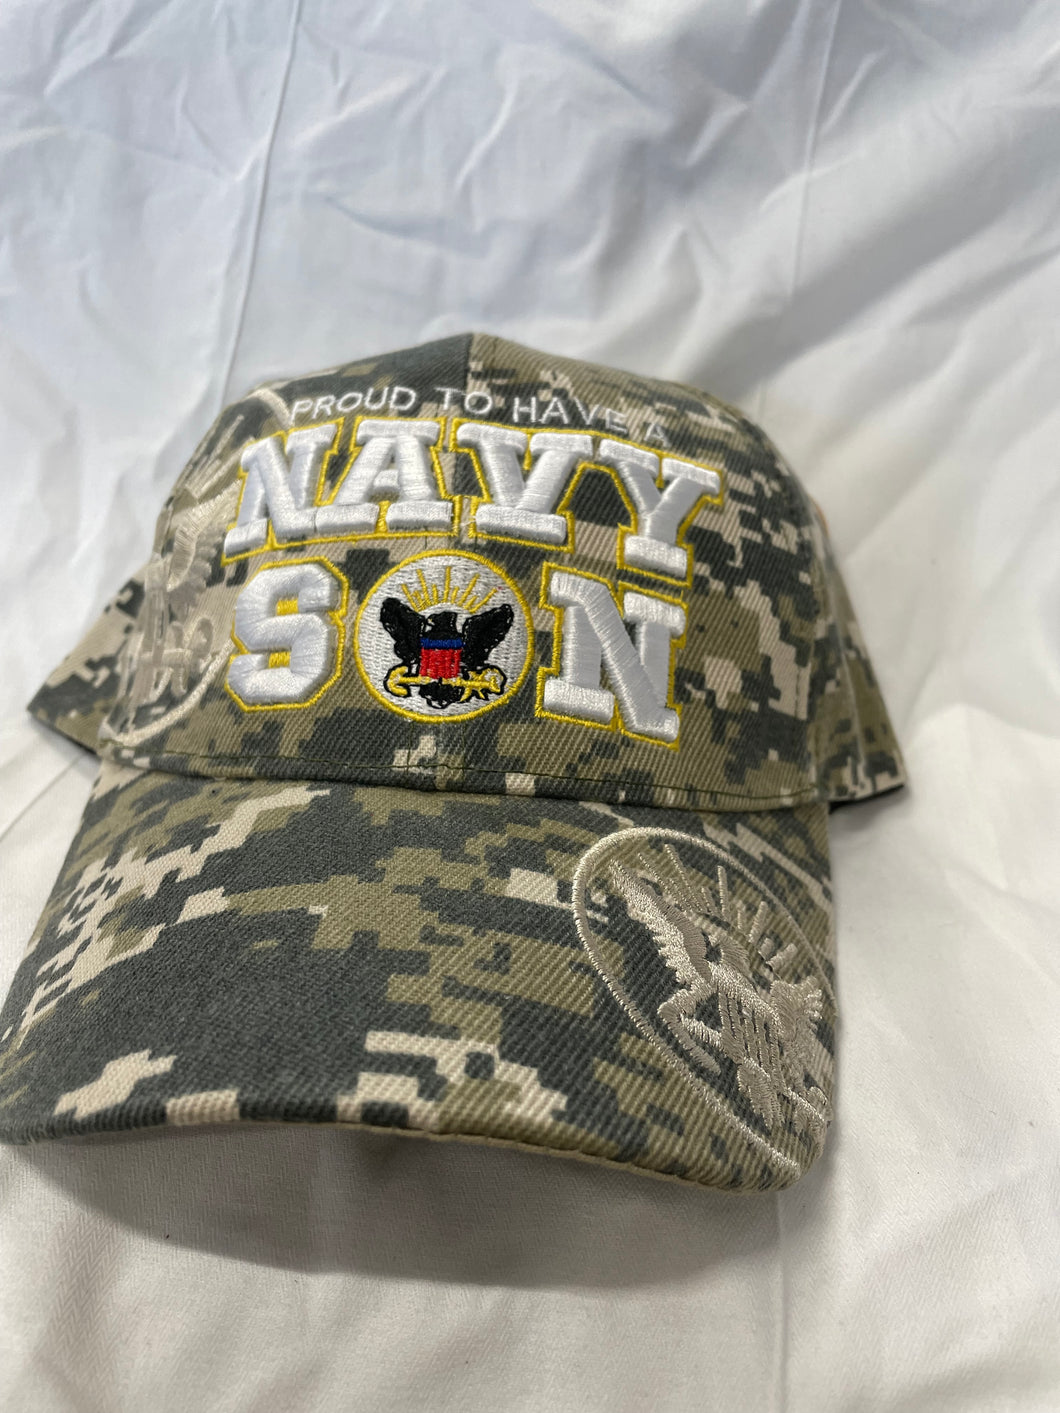 FRONT OF PROUD TO HAVE A NAVY SON HAT